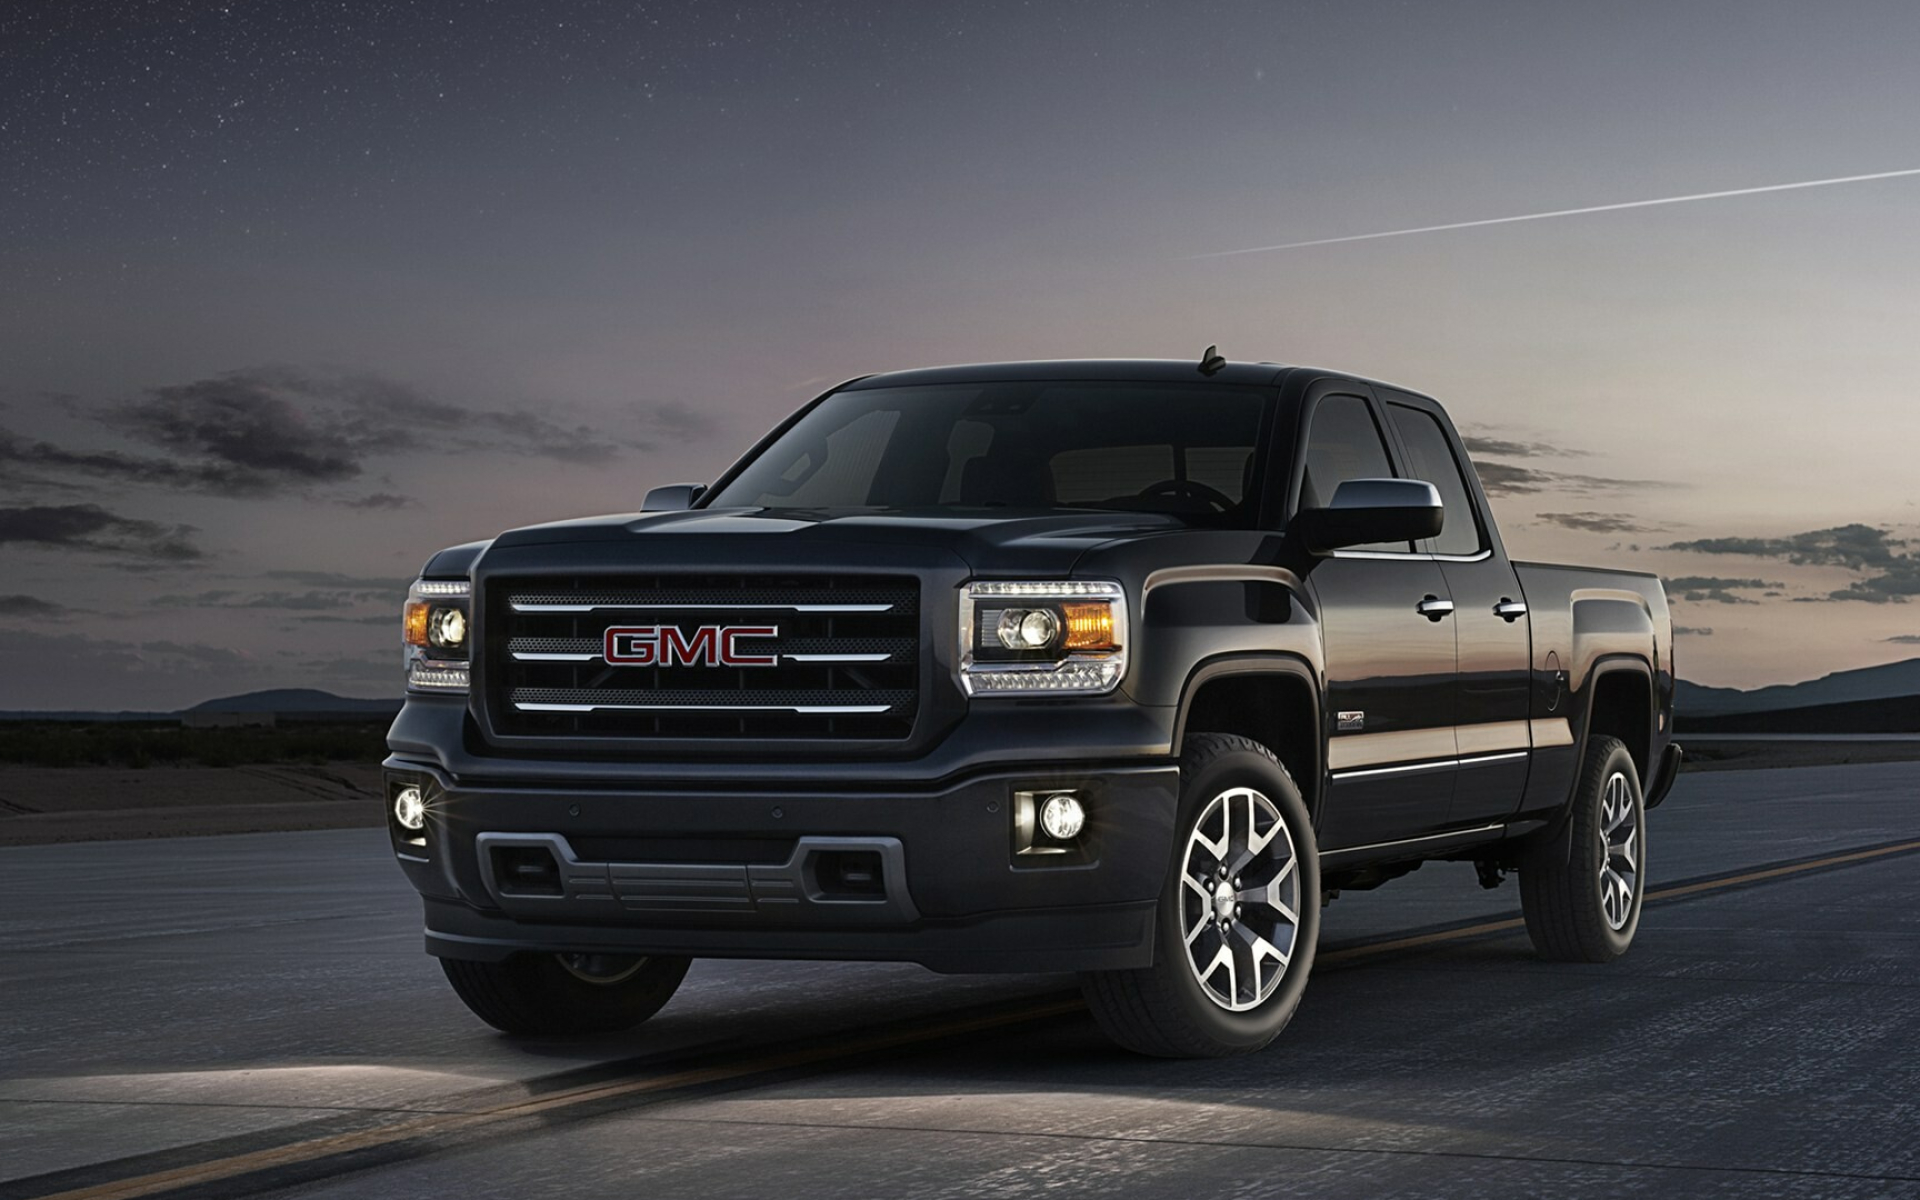 GMC Sierra: The large chrome grille, New generation of the popular American pickup. 1920x1200 HD Wallpaper.